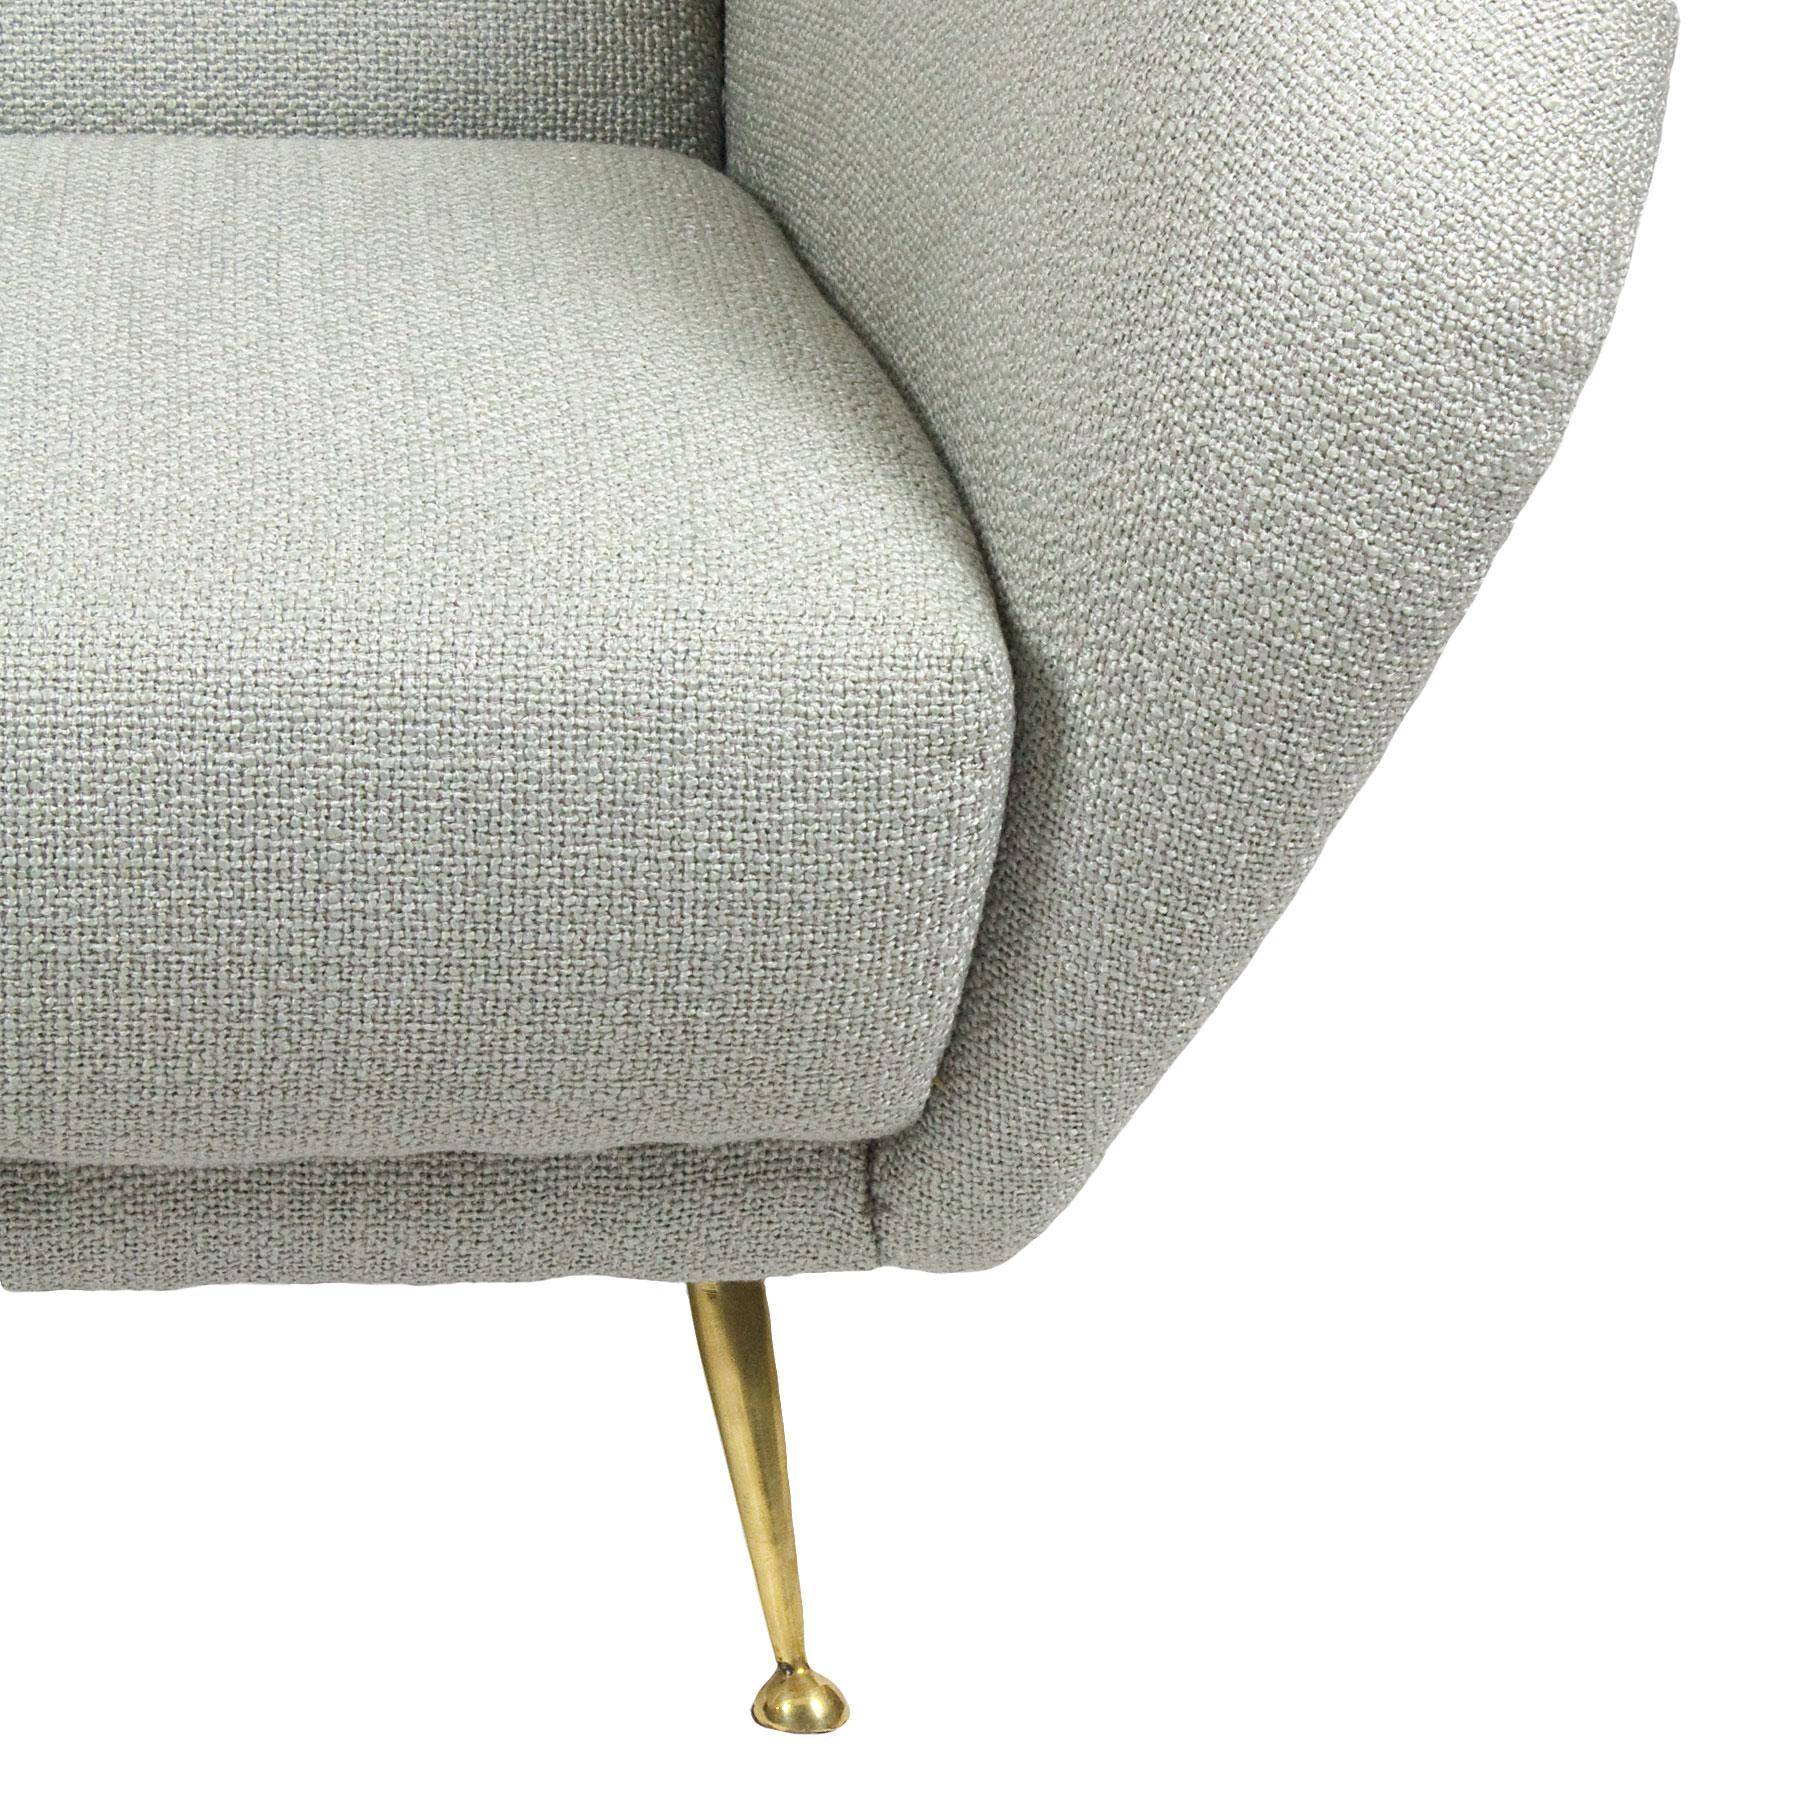 1950s Wing Armchair by i.S.a., Polyester Fabric, Brass, Italy 1